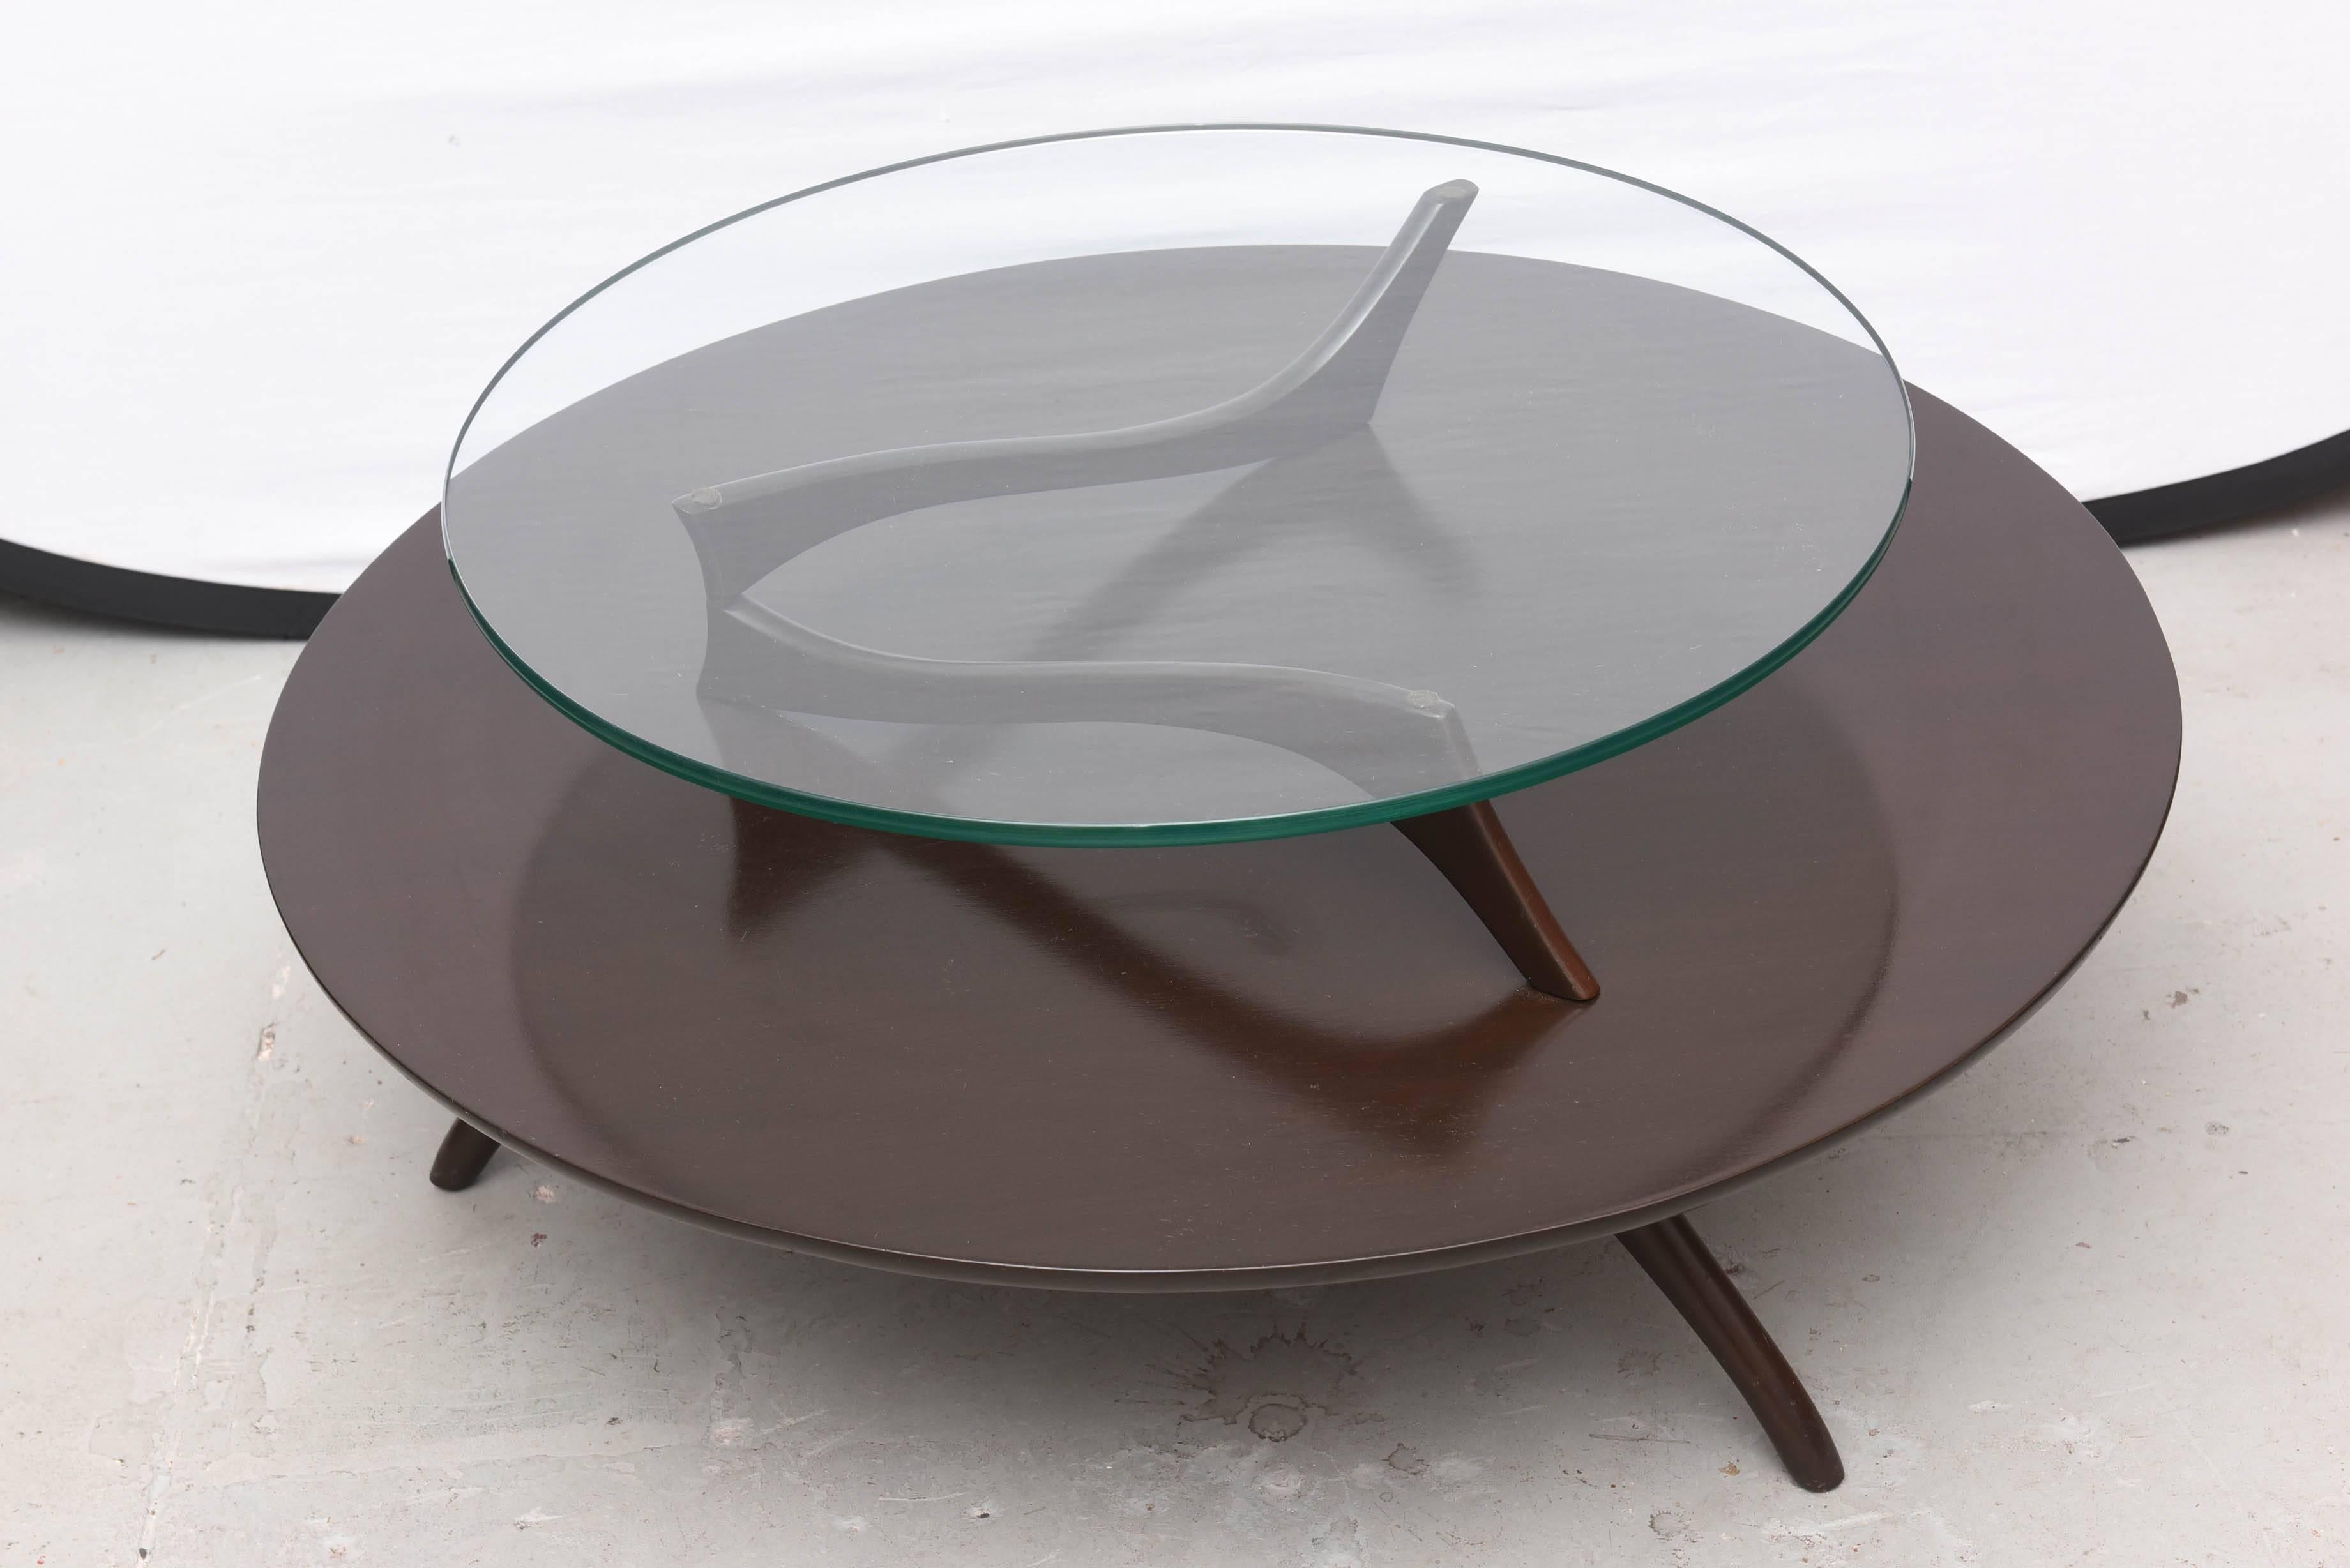 Dark walnut Kagan coffee table from collector in Paris, 1960s, USA.